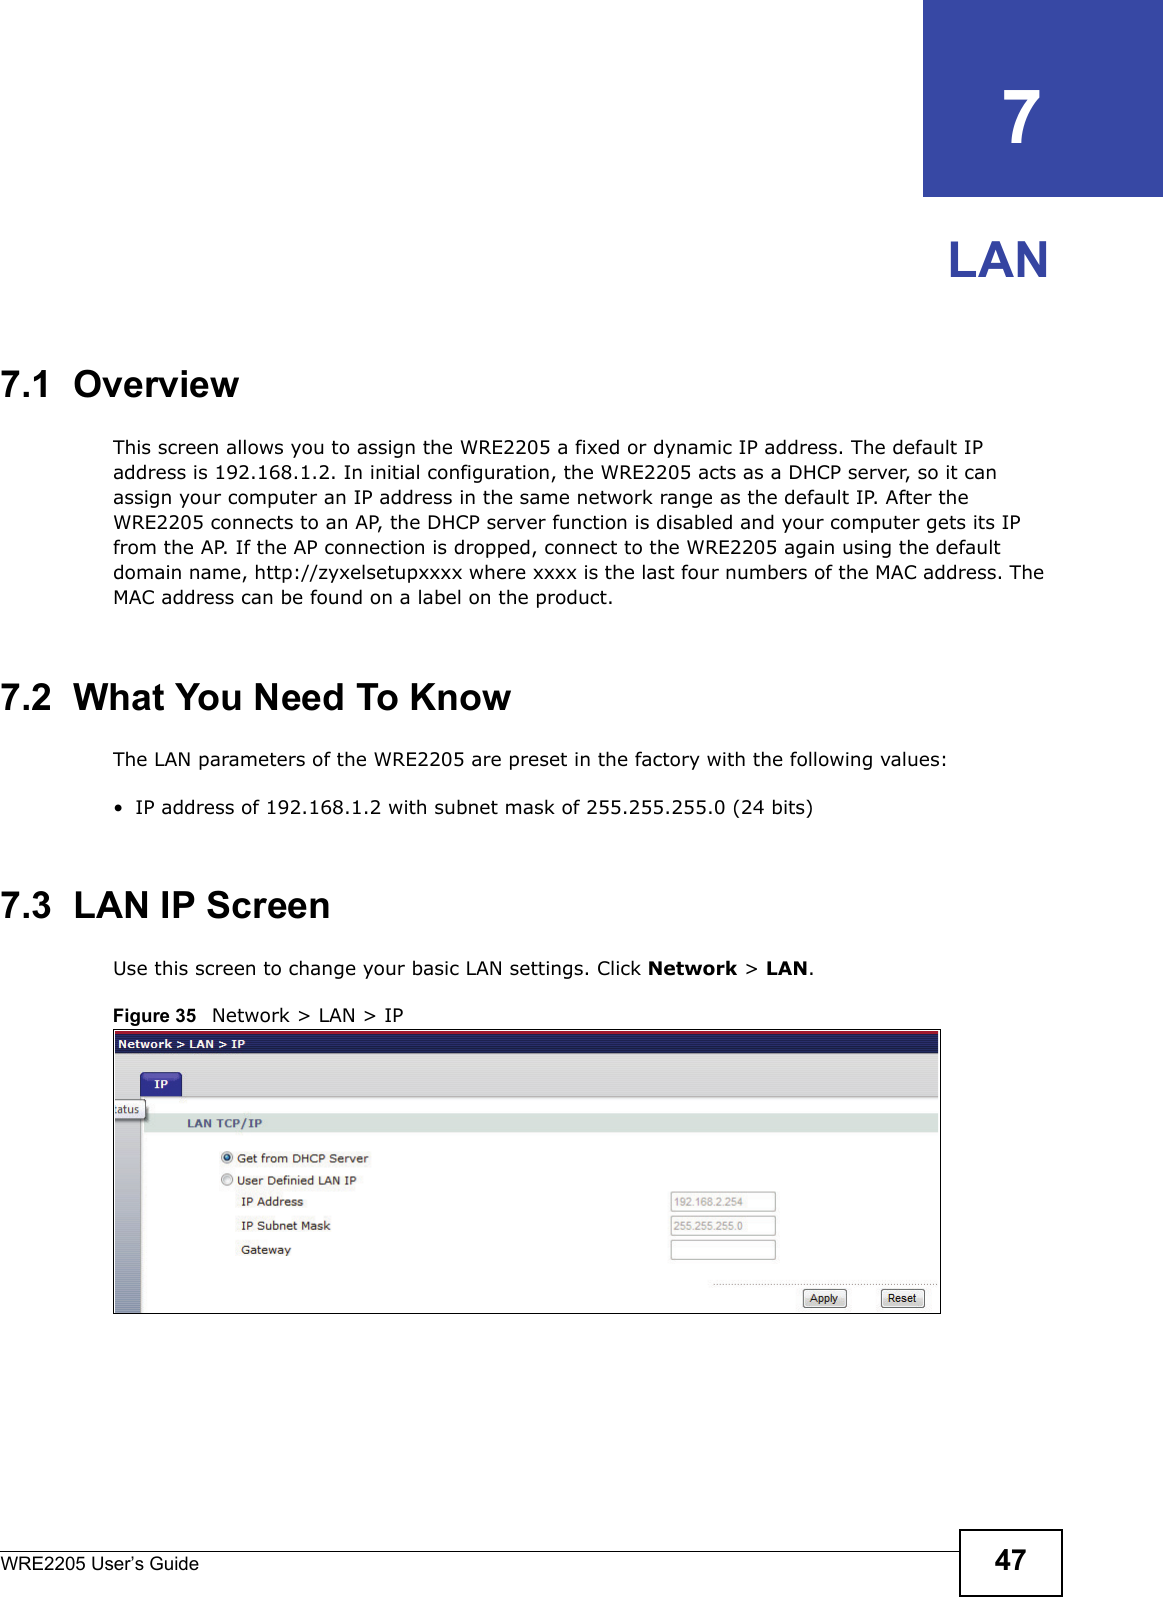 WRE2205 User’s Guide 47CHAPTER   7LAN7.1  OverviewThis screen allows you to assign the WRE2205 a fixed or dynamic IP address. The default IP address is 192.168.1.2. In initial configuration, the WRE2205 acts as a DHCP server, so it can assign your computer an IP address in the same network range as the default IP. After the WRE2205 connects to an AP, the DHCP server function is disabled and your computer gets its IP from the AP. If the AP connection is dropped, connect to the WRE2205 again using the default domain name, http://zyxelsetupxxxx where xxxx is the last four numbers of the MAC address. The MAC address can be found on a label on the product.7.2  What You Need To KnowThe LAN parameters of the WRE2205 are preset in the factory with the following values:• IP address of 192.168.1.2 with subnet mask of 255.255.255.0 (24 bits)7.3  LAN IP ScreenUse this screen to change your basic LAN settings. Click Network &gt; LAN.Figure 35   Network &gt; LAN &gt; IP 